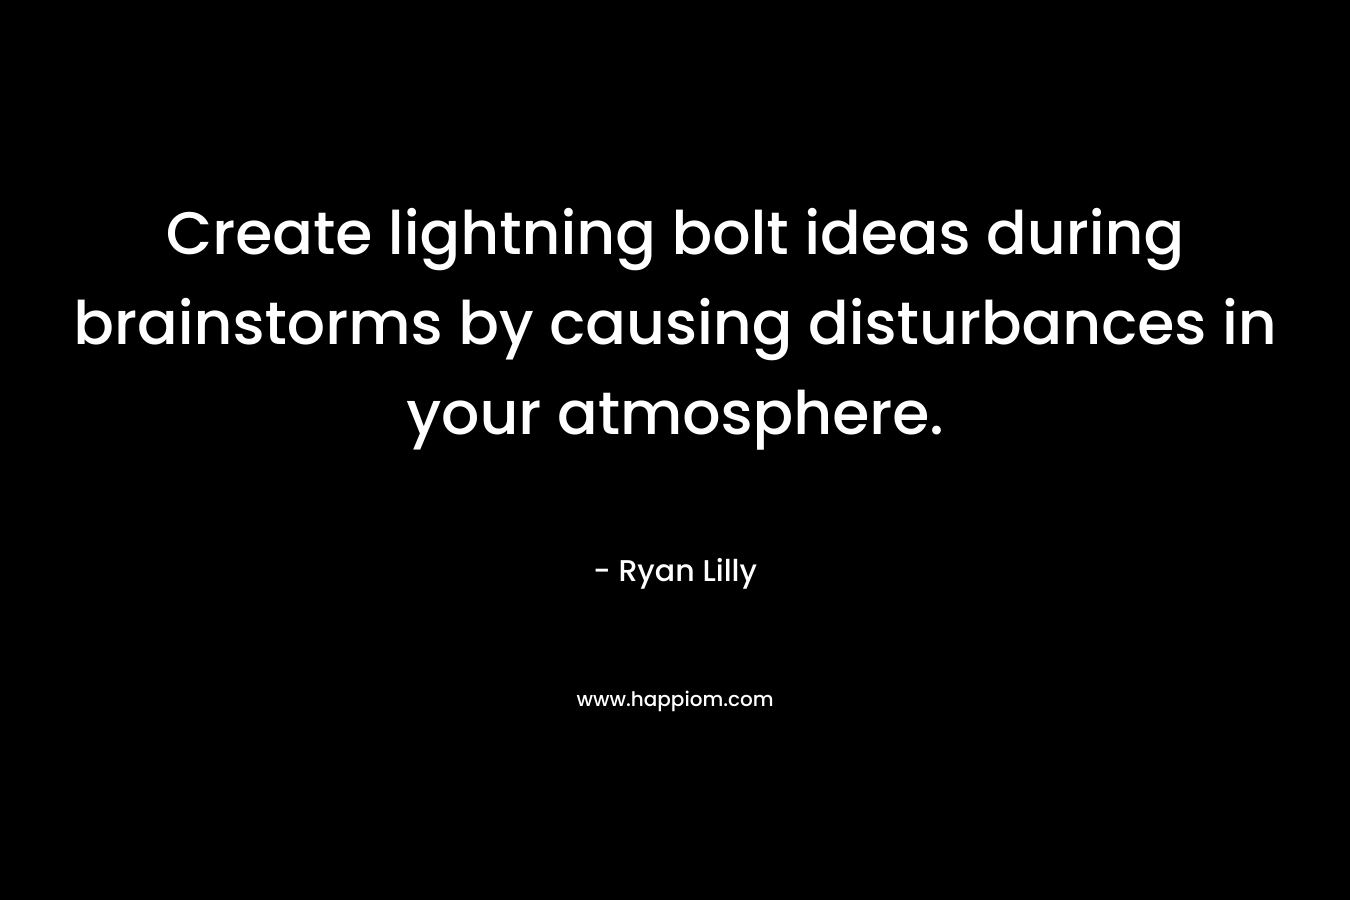 Create lightning bolt ideas during brainstorms by causing disturbances in your atmosphere. – Ryan Lilly